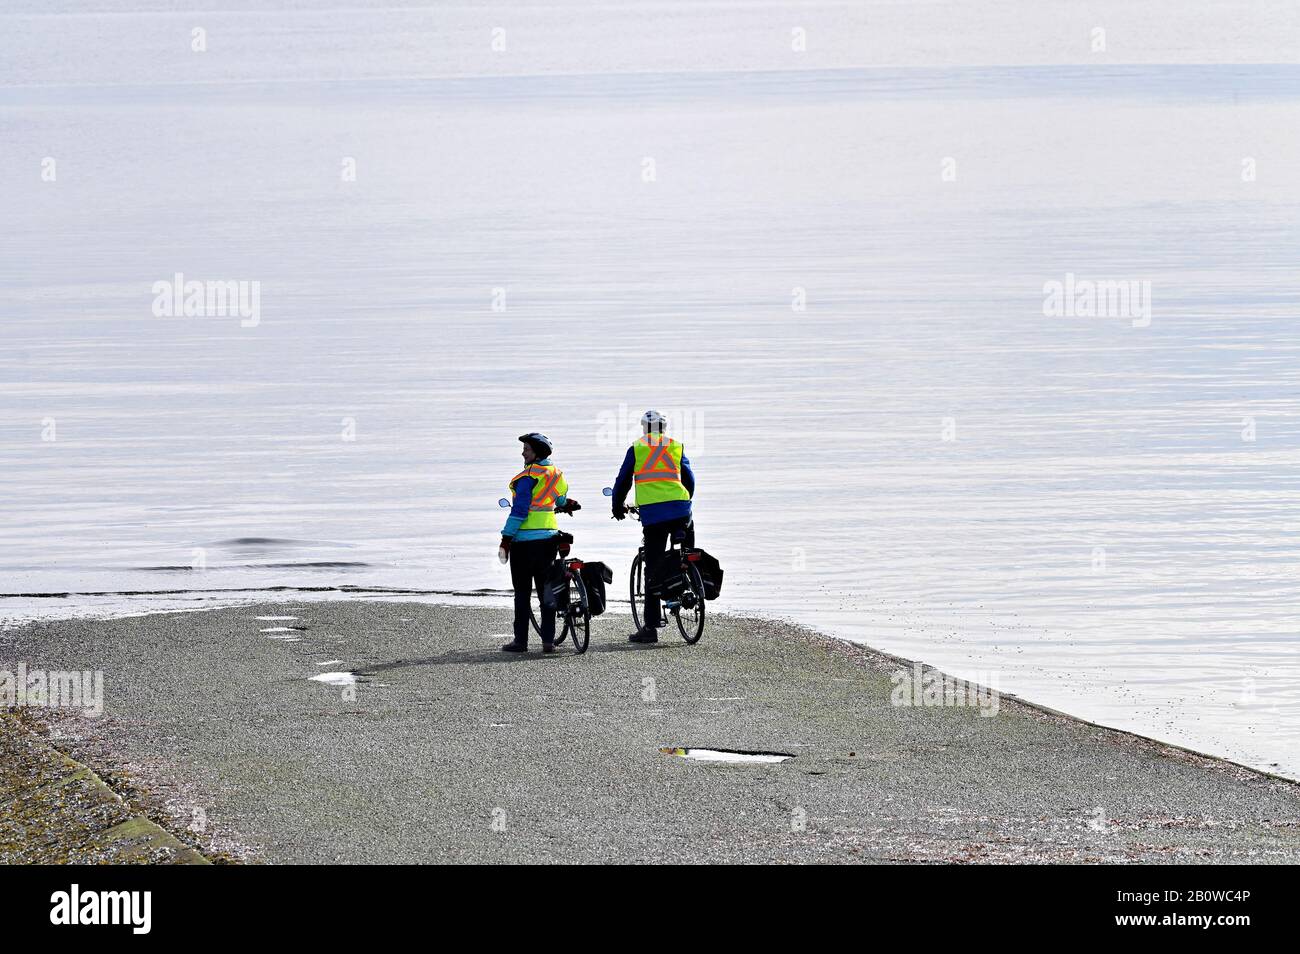 Two cyclists on a boat ramp. Stock Photo